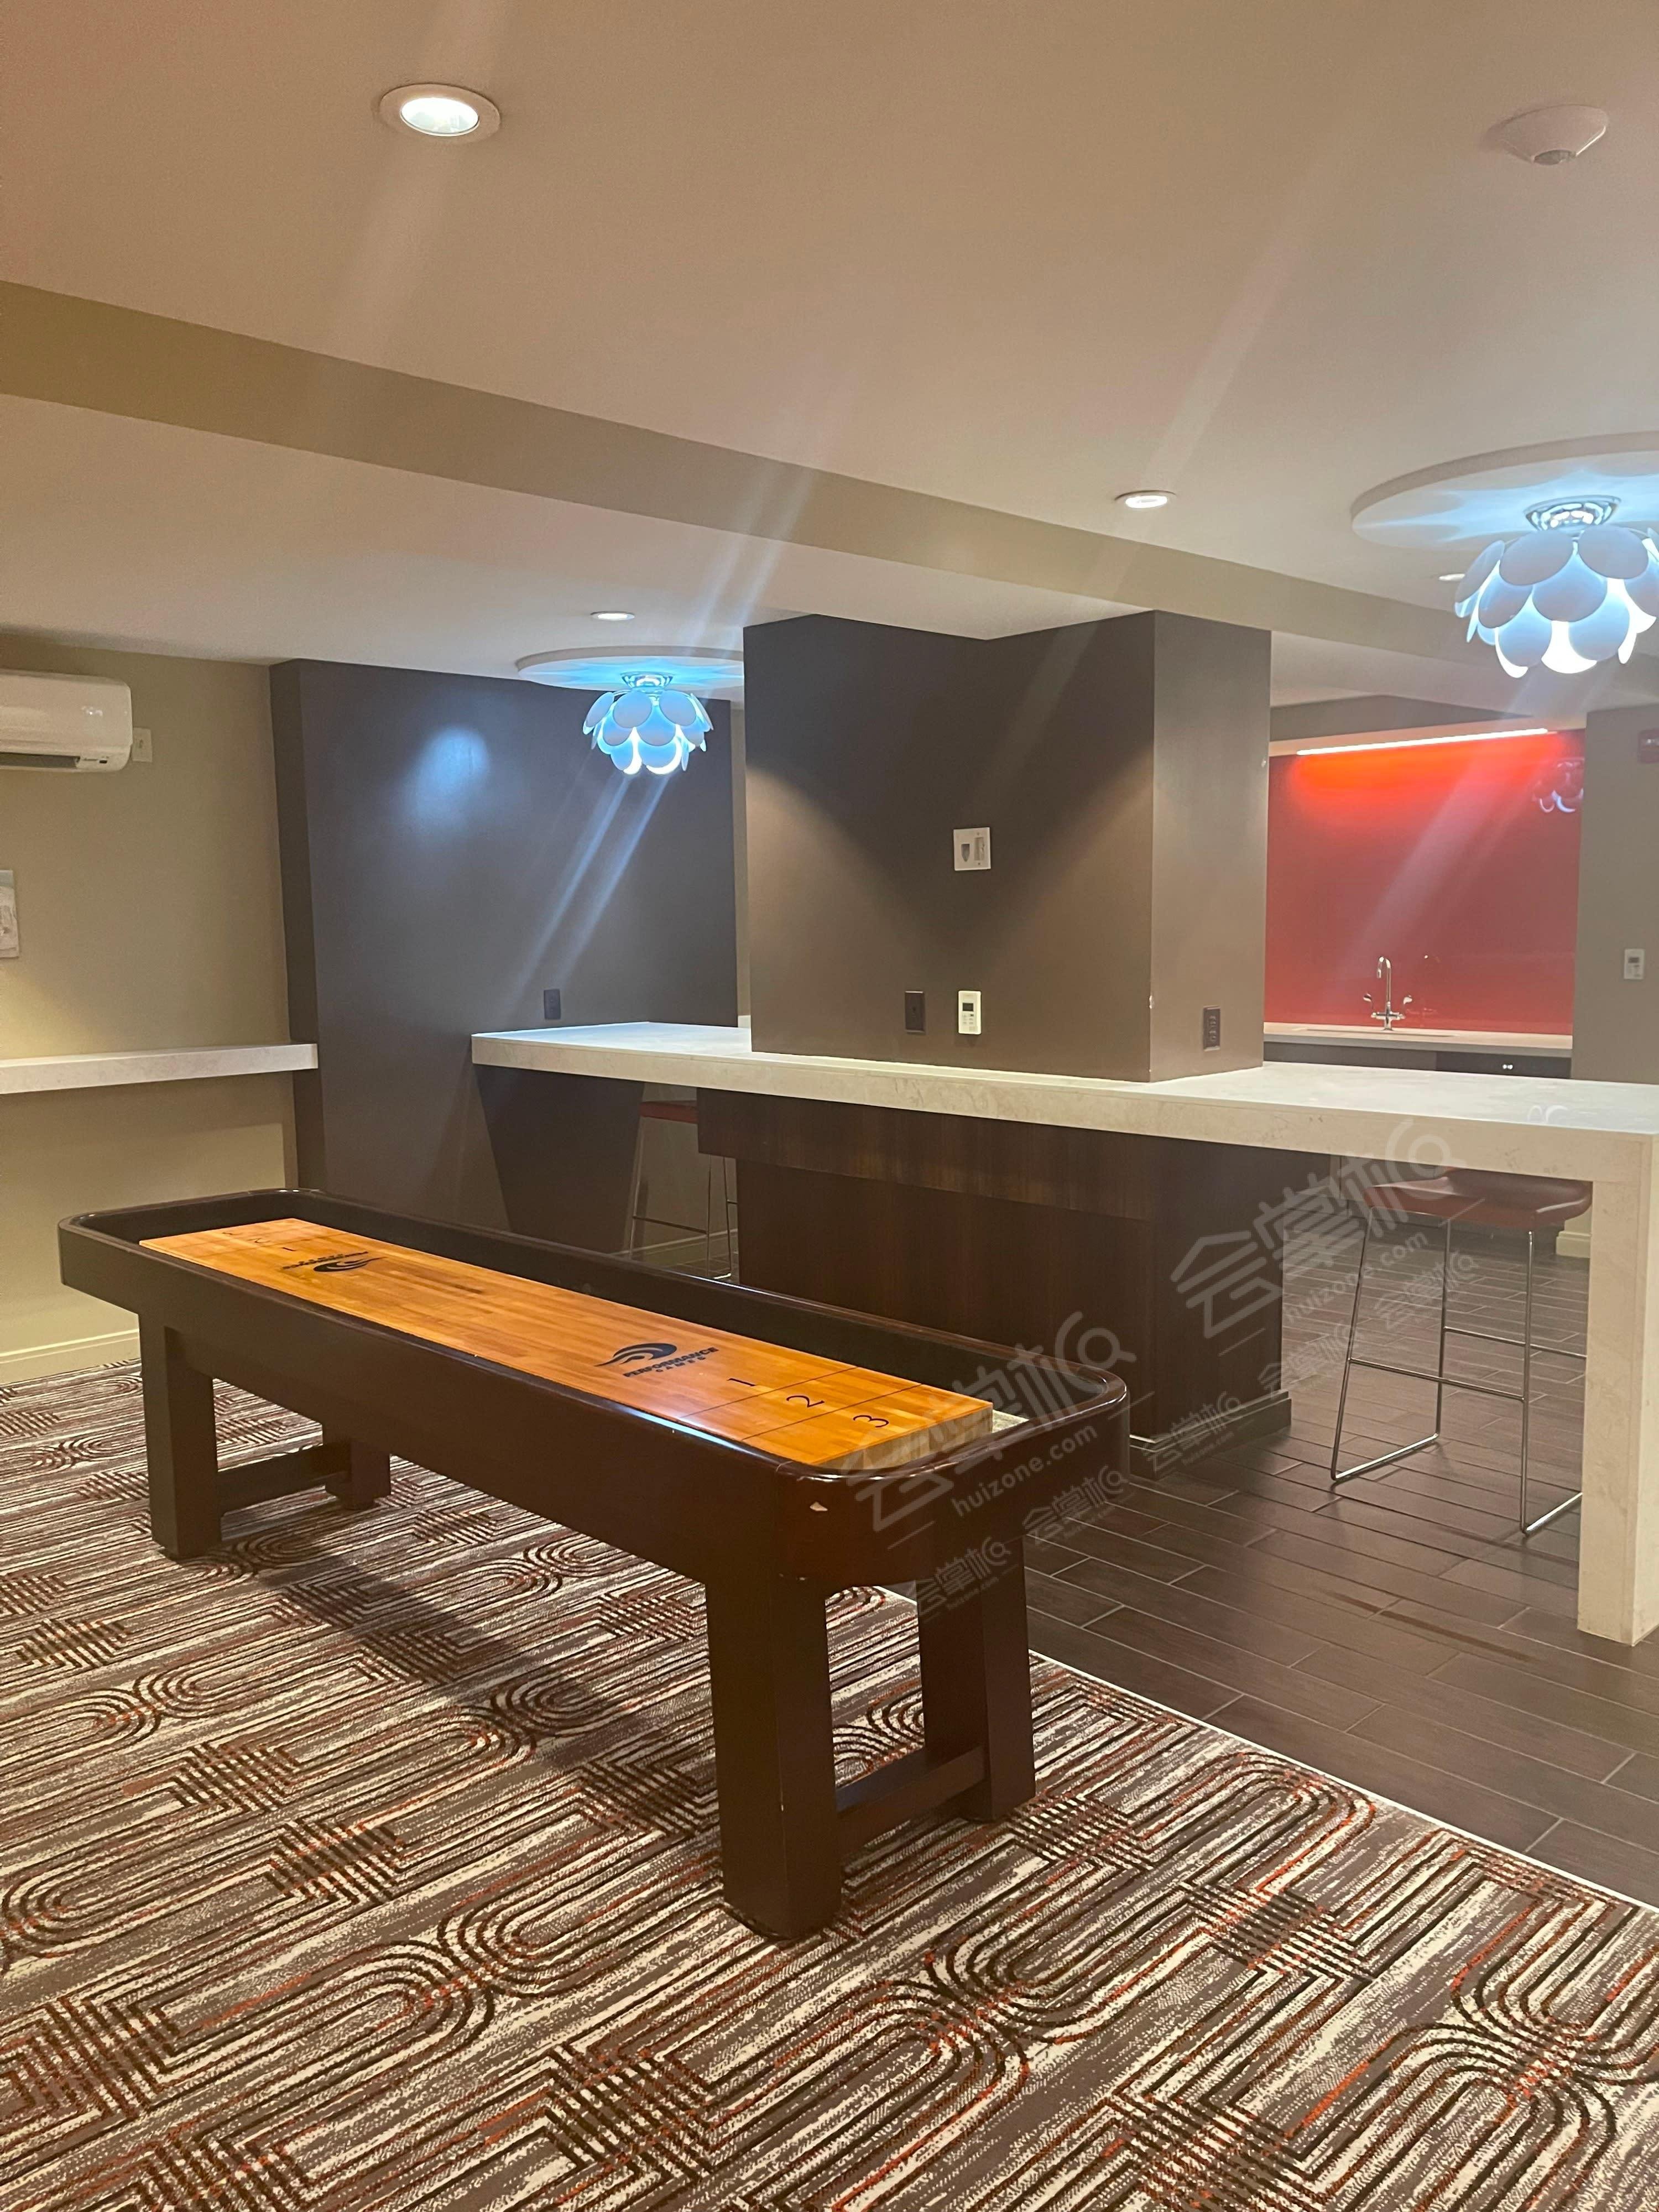 Modern Club Room in the Heart of Dupont Circle